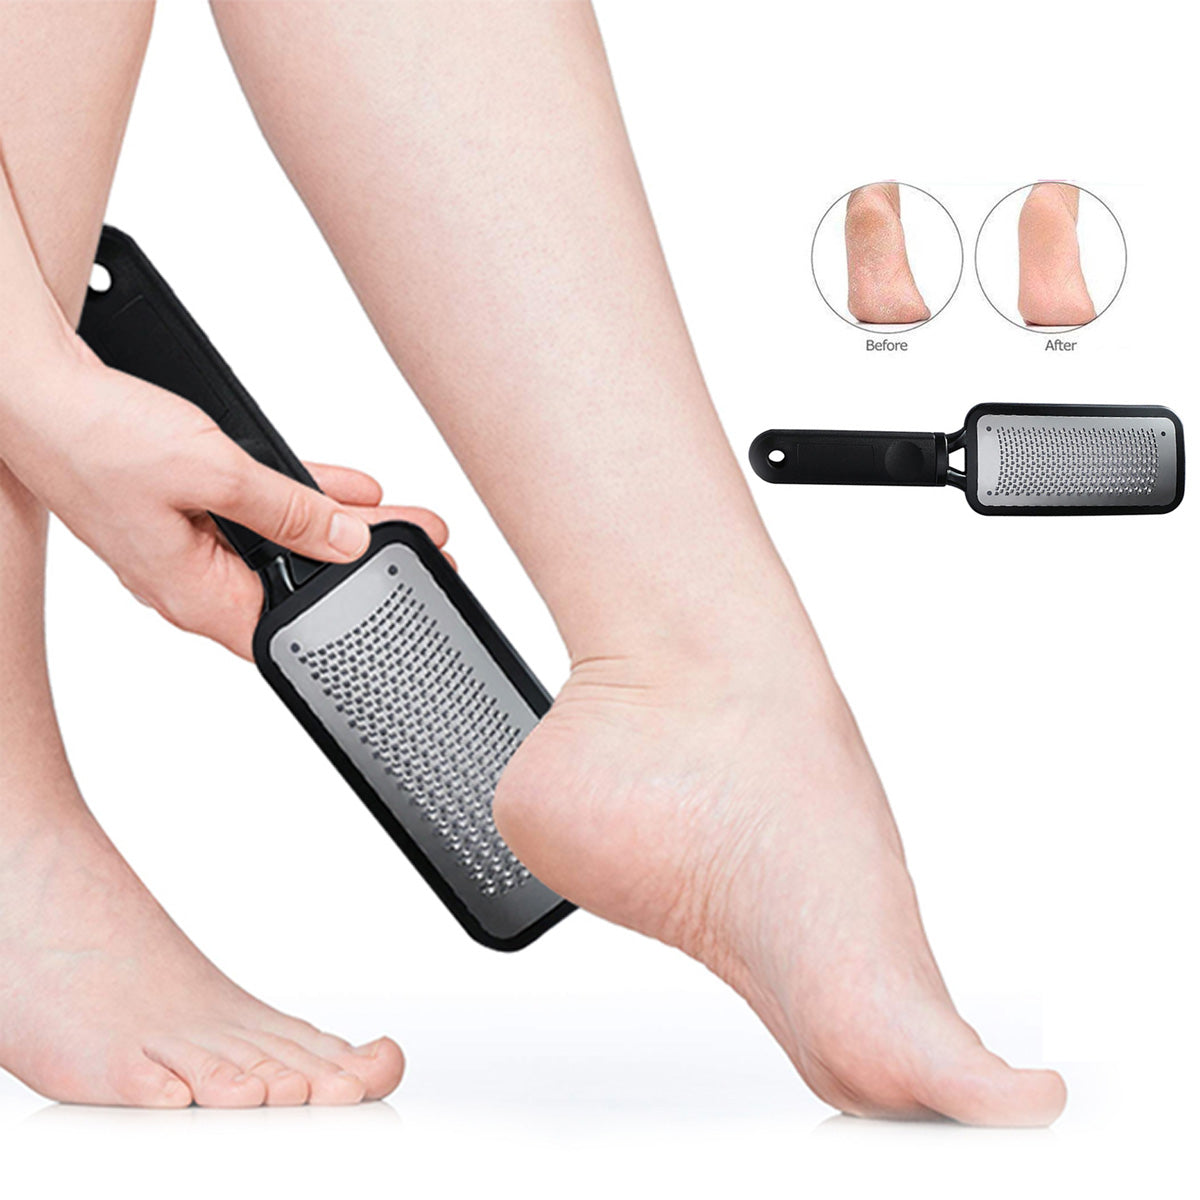 Foot Callus Remover for Feet - Professional Foot Scrubber Dead Skin Remover  with Medical Grade Steel - Ergonomic and Easy to Use Foot File Callus